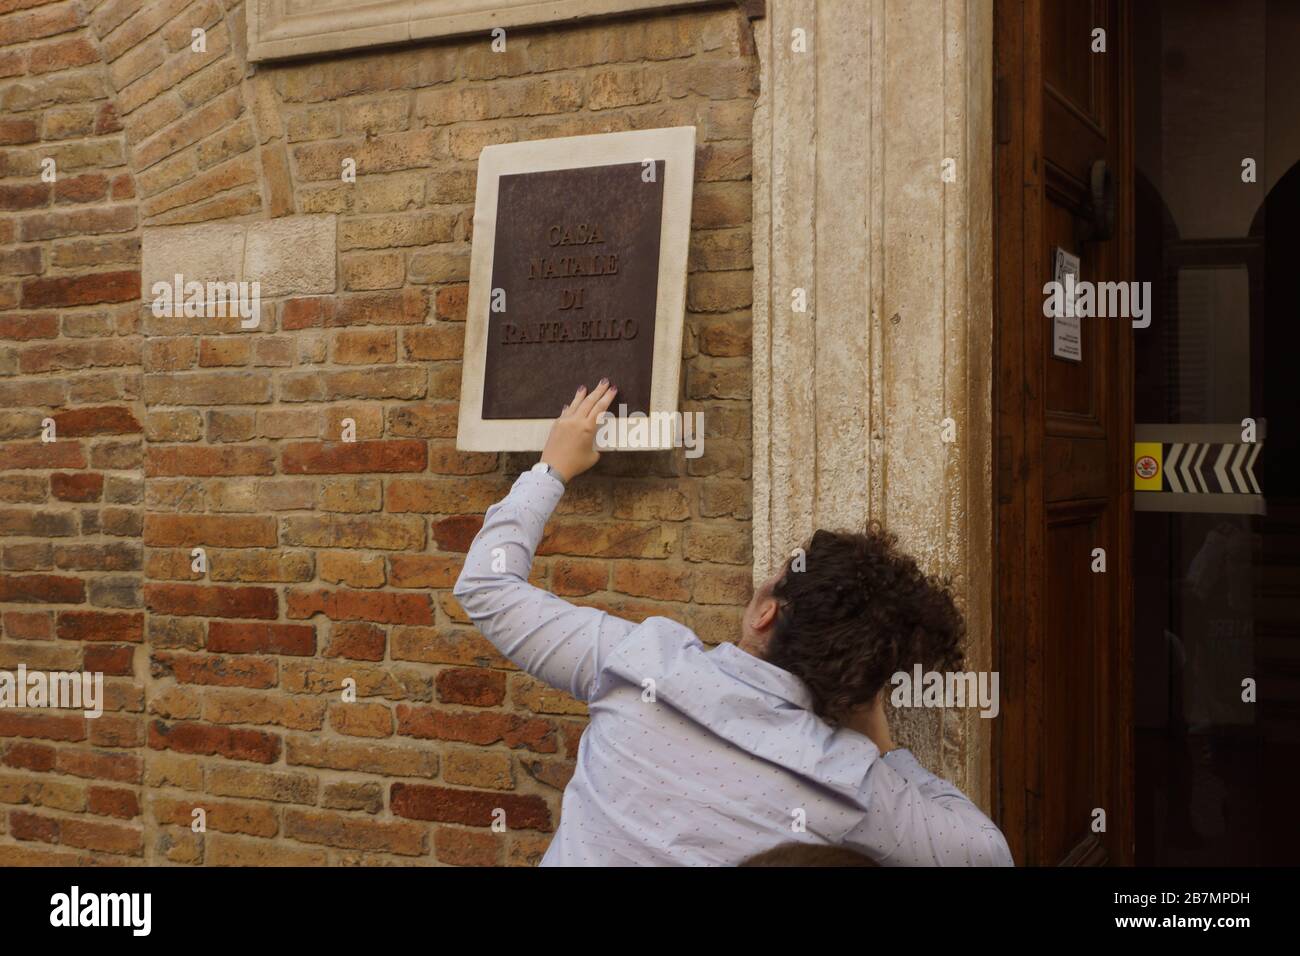 An employee of the museum hangs a sign each time so that students do not carry it away. Raphael's house-museum (Raffaello Santi)  in Urbino. Italy Stock Photo